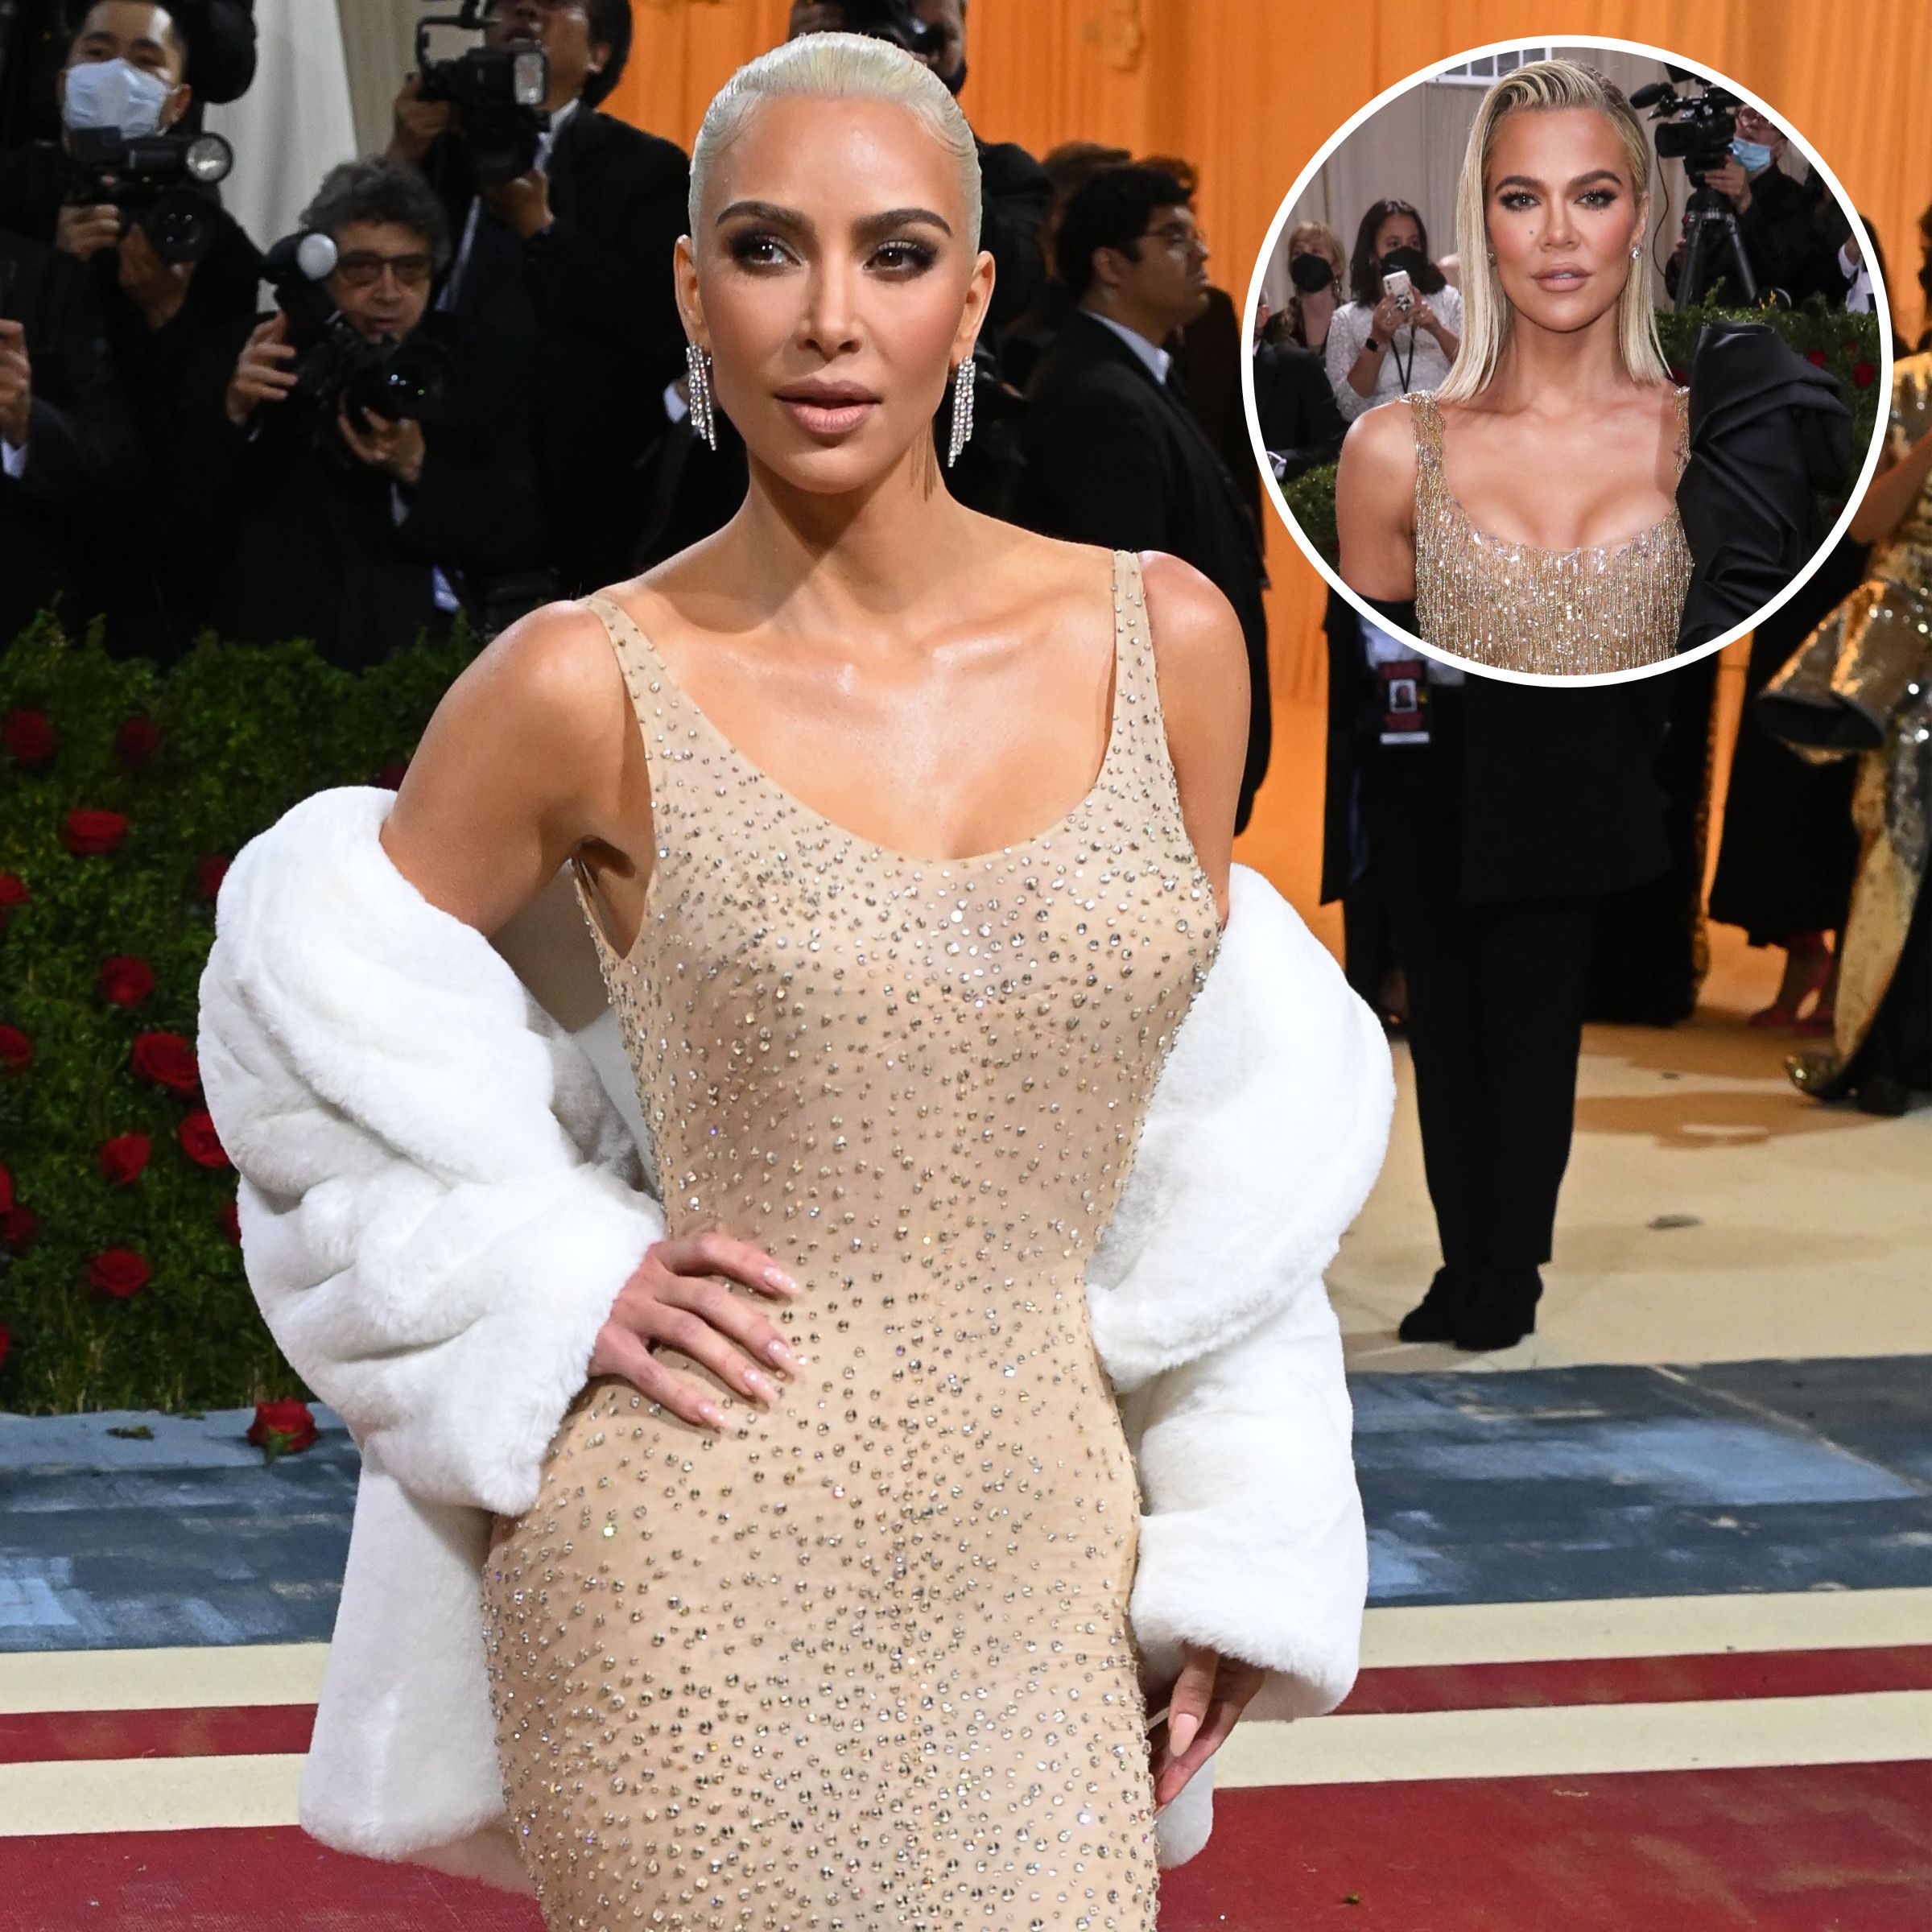 Met Gala 2022: What the Kardashian-Jenners Wore on the Red Carpet